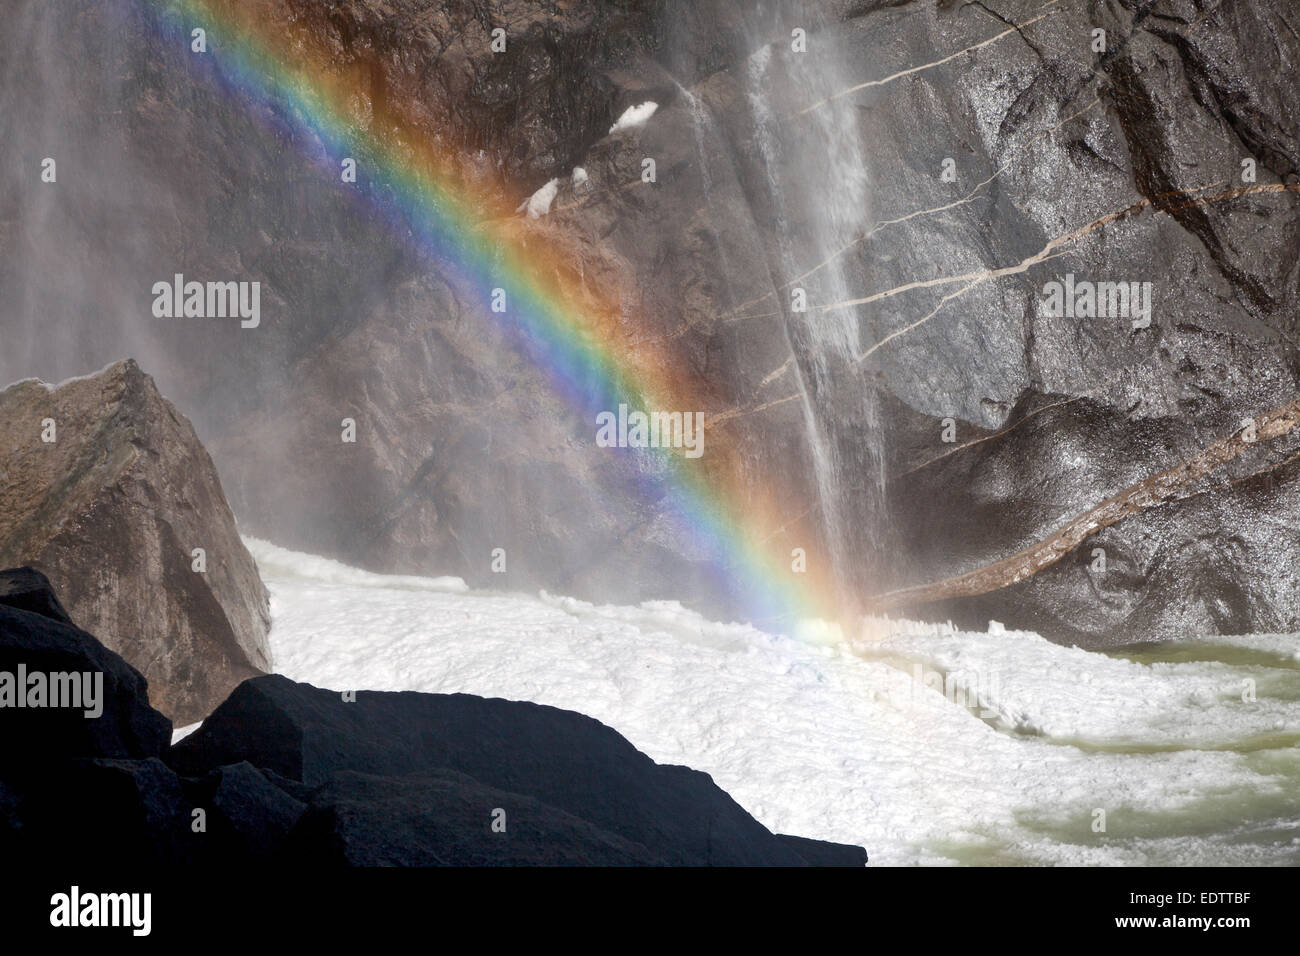 Rock face, rainbow, and frazil ice at the base of Lower Yosemite Falls in Yosemite National Park Stock Photo